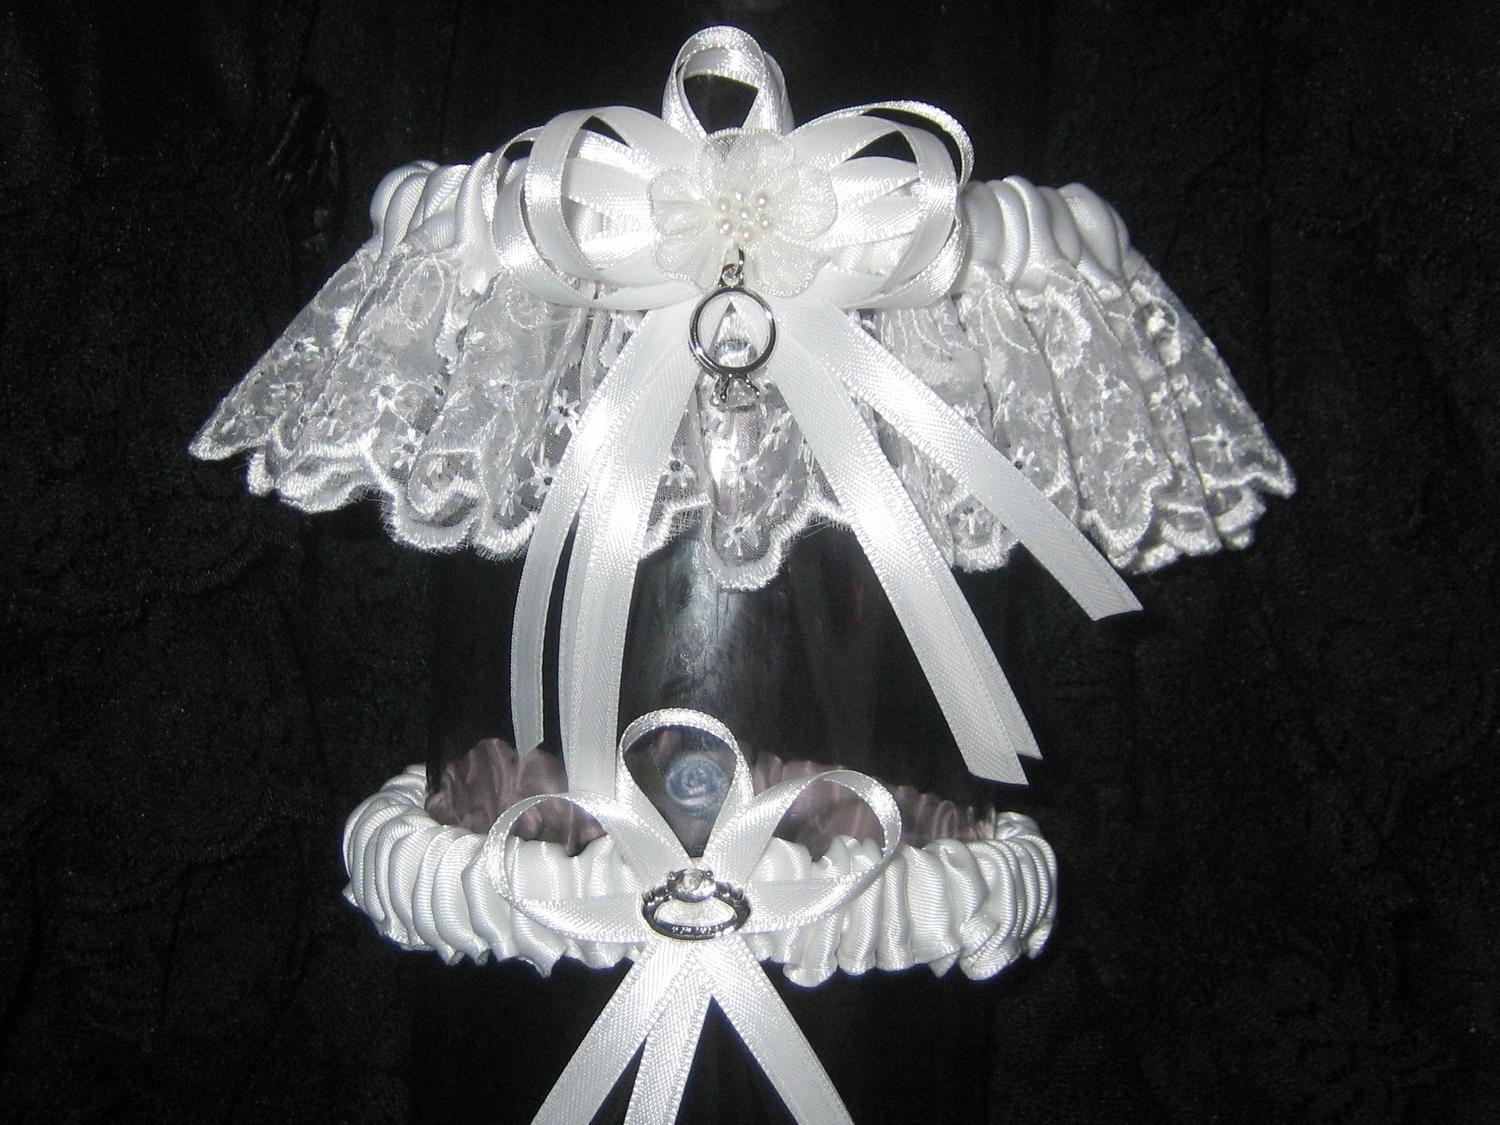 Bridal Garter Set in White Irish Lace with Bows and Engagement